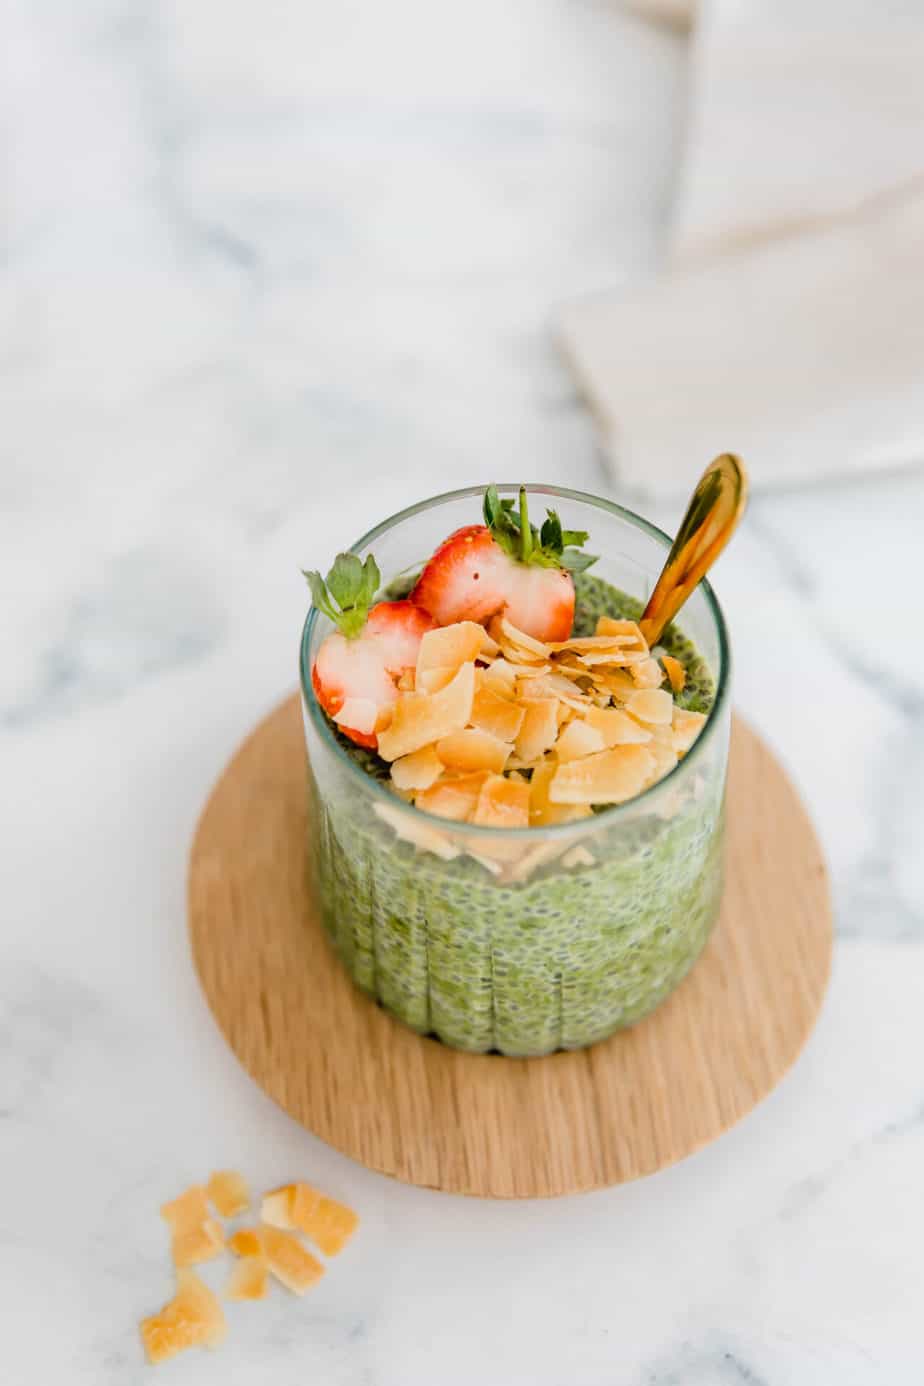 Strawberry Matcha Chia Seed Pudding with Almond Baking-Ginger